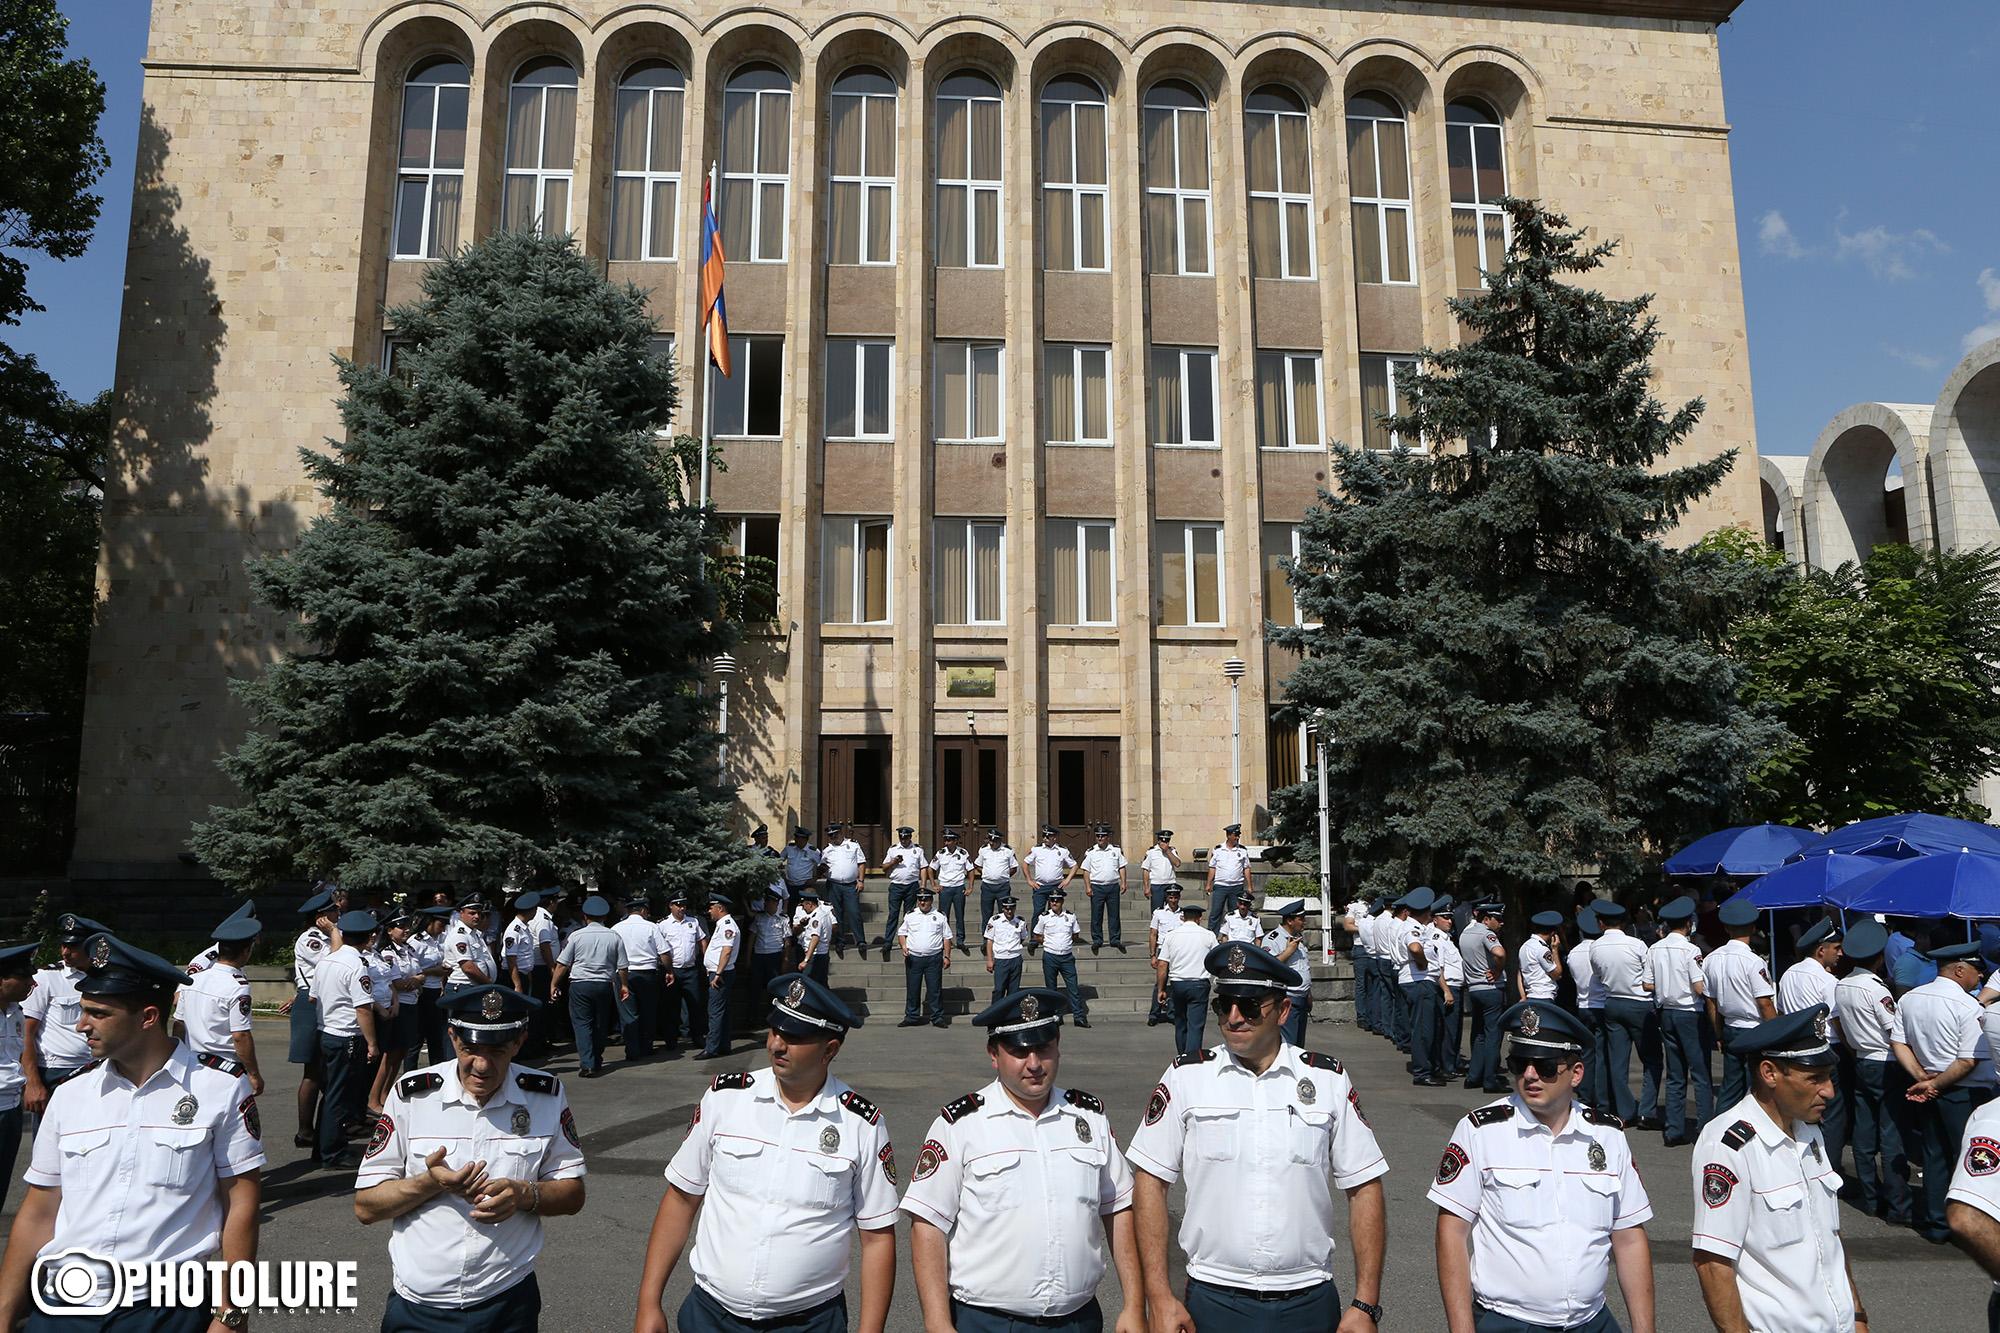 What Can Armenia Learn from Ukraine’s and Moldova’s Constitutional Court Crises?